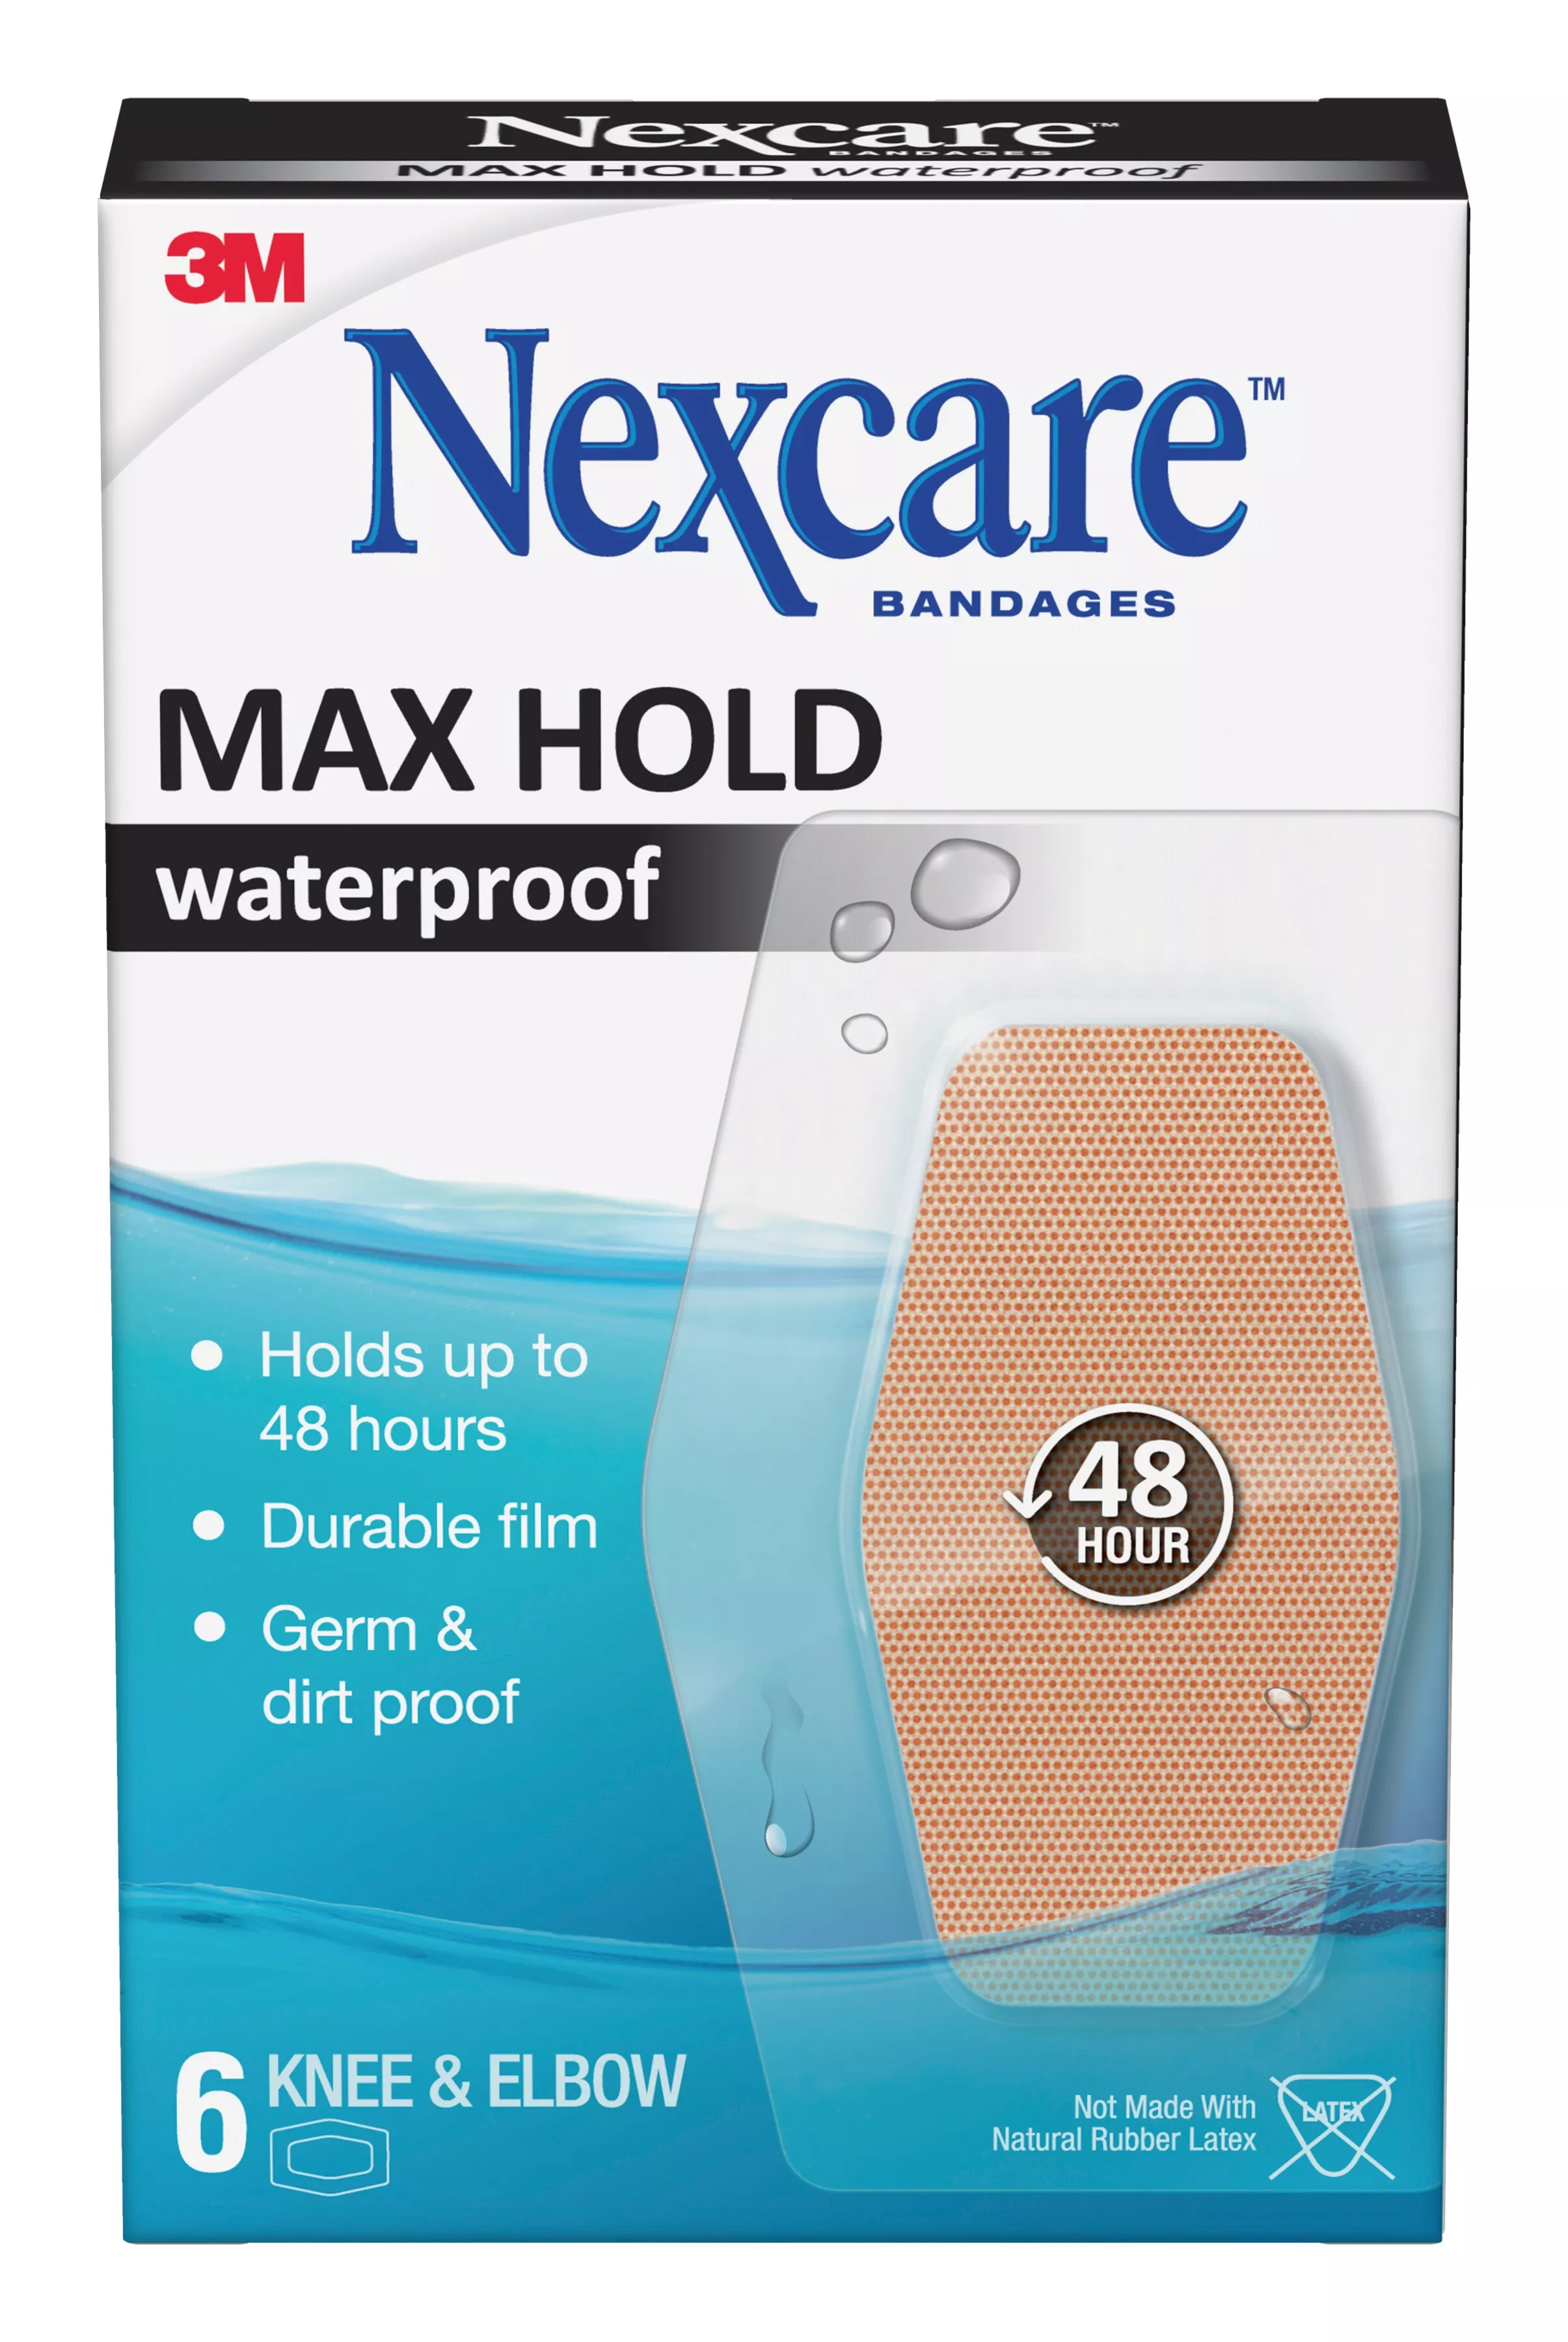 Nexcare™ Max Hold Waterproof Bandages MHW-06, Knee & Elbow, 2.38 in x 3.5 in (60 mm x 88 mm)